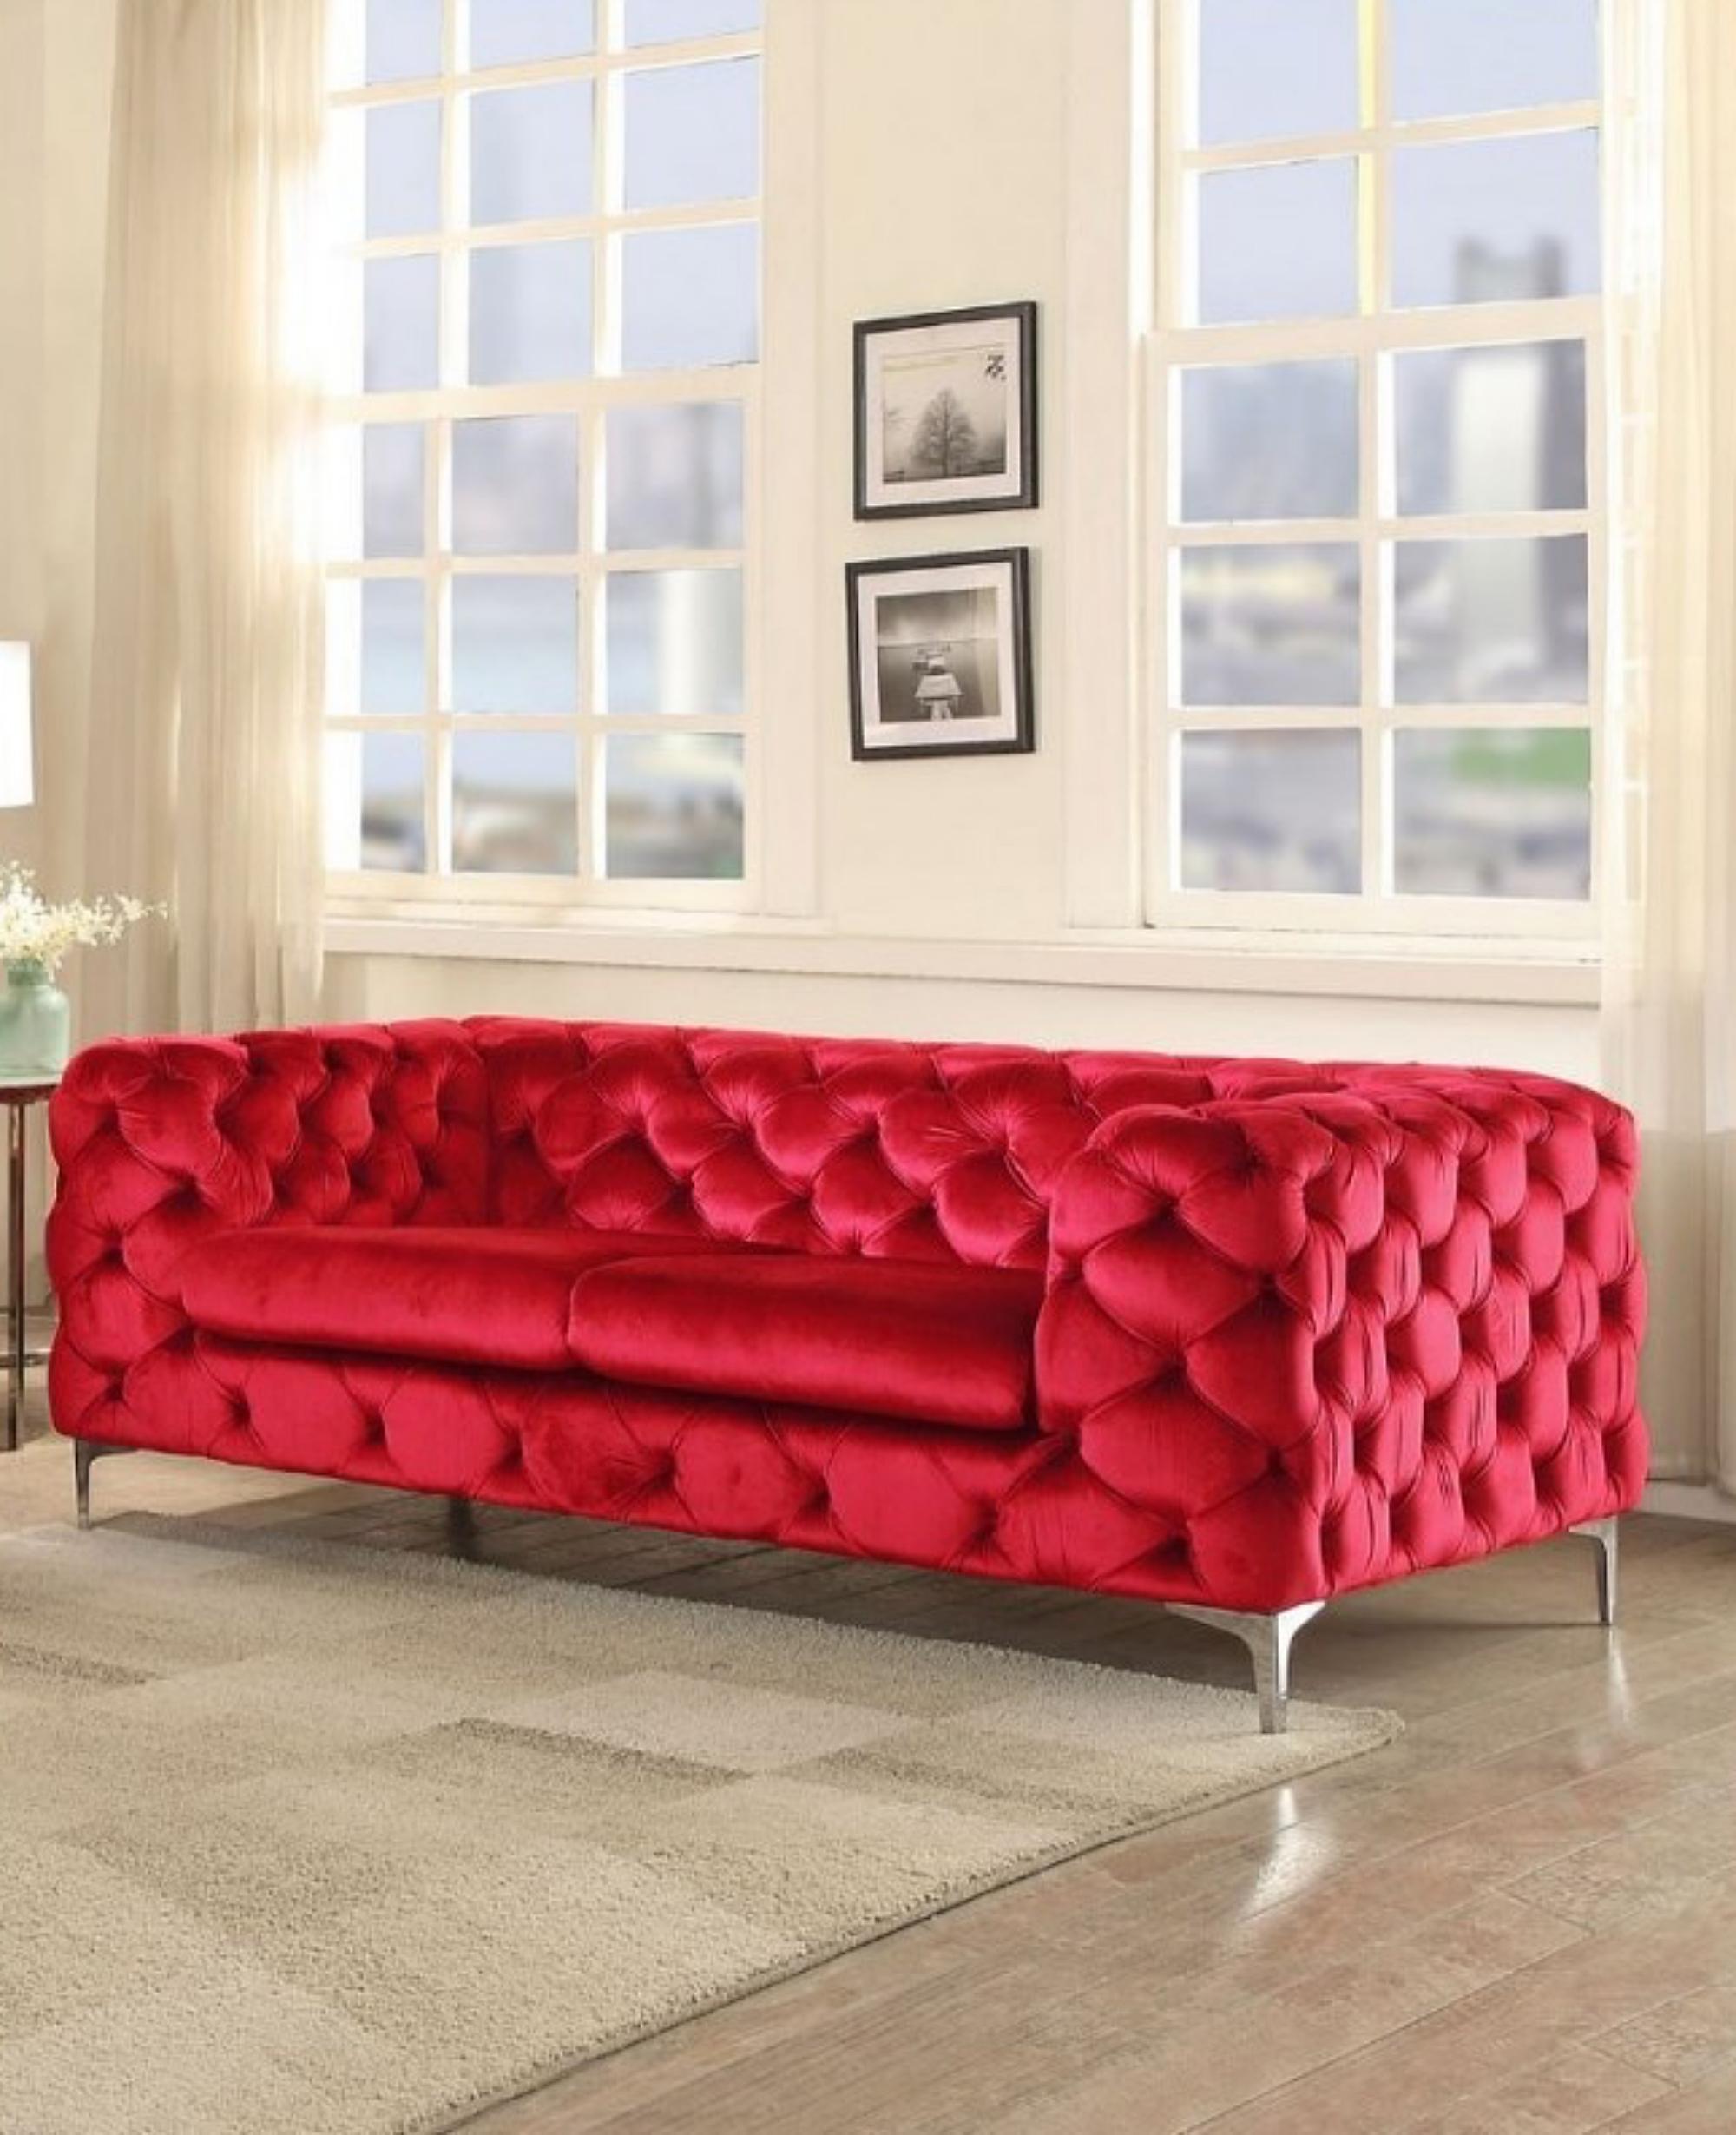 Chester 2 seater sofa, red wine velvet new

Data sheet:

-Design sofa with 2 seats.

-Made with solid wooden structure.

-High-density polyurethane foam.

-Upholstered in green velvet

-Chrome metal legs

-Other colors